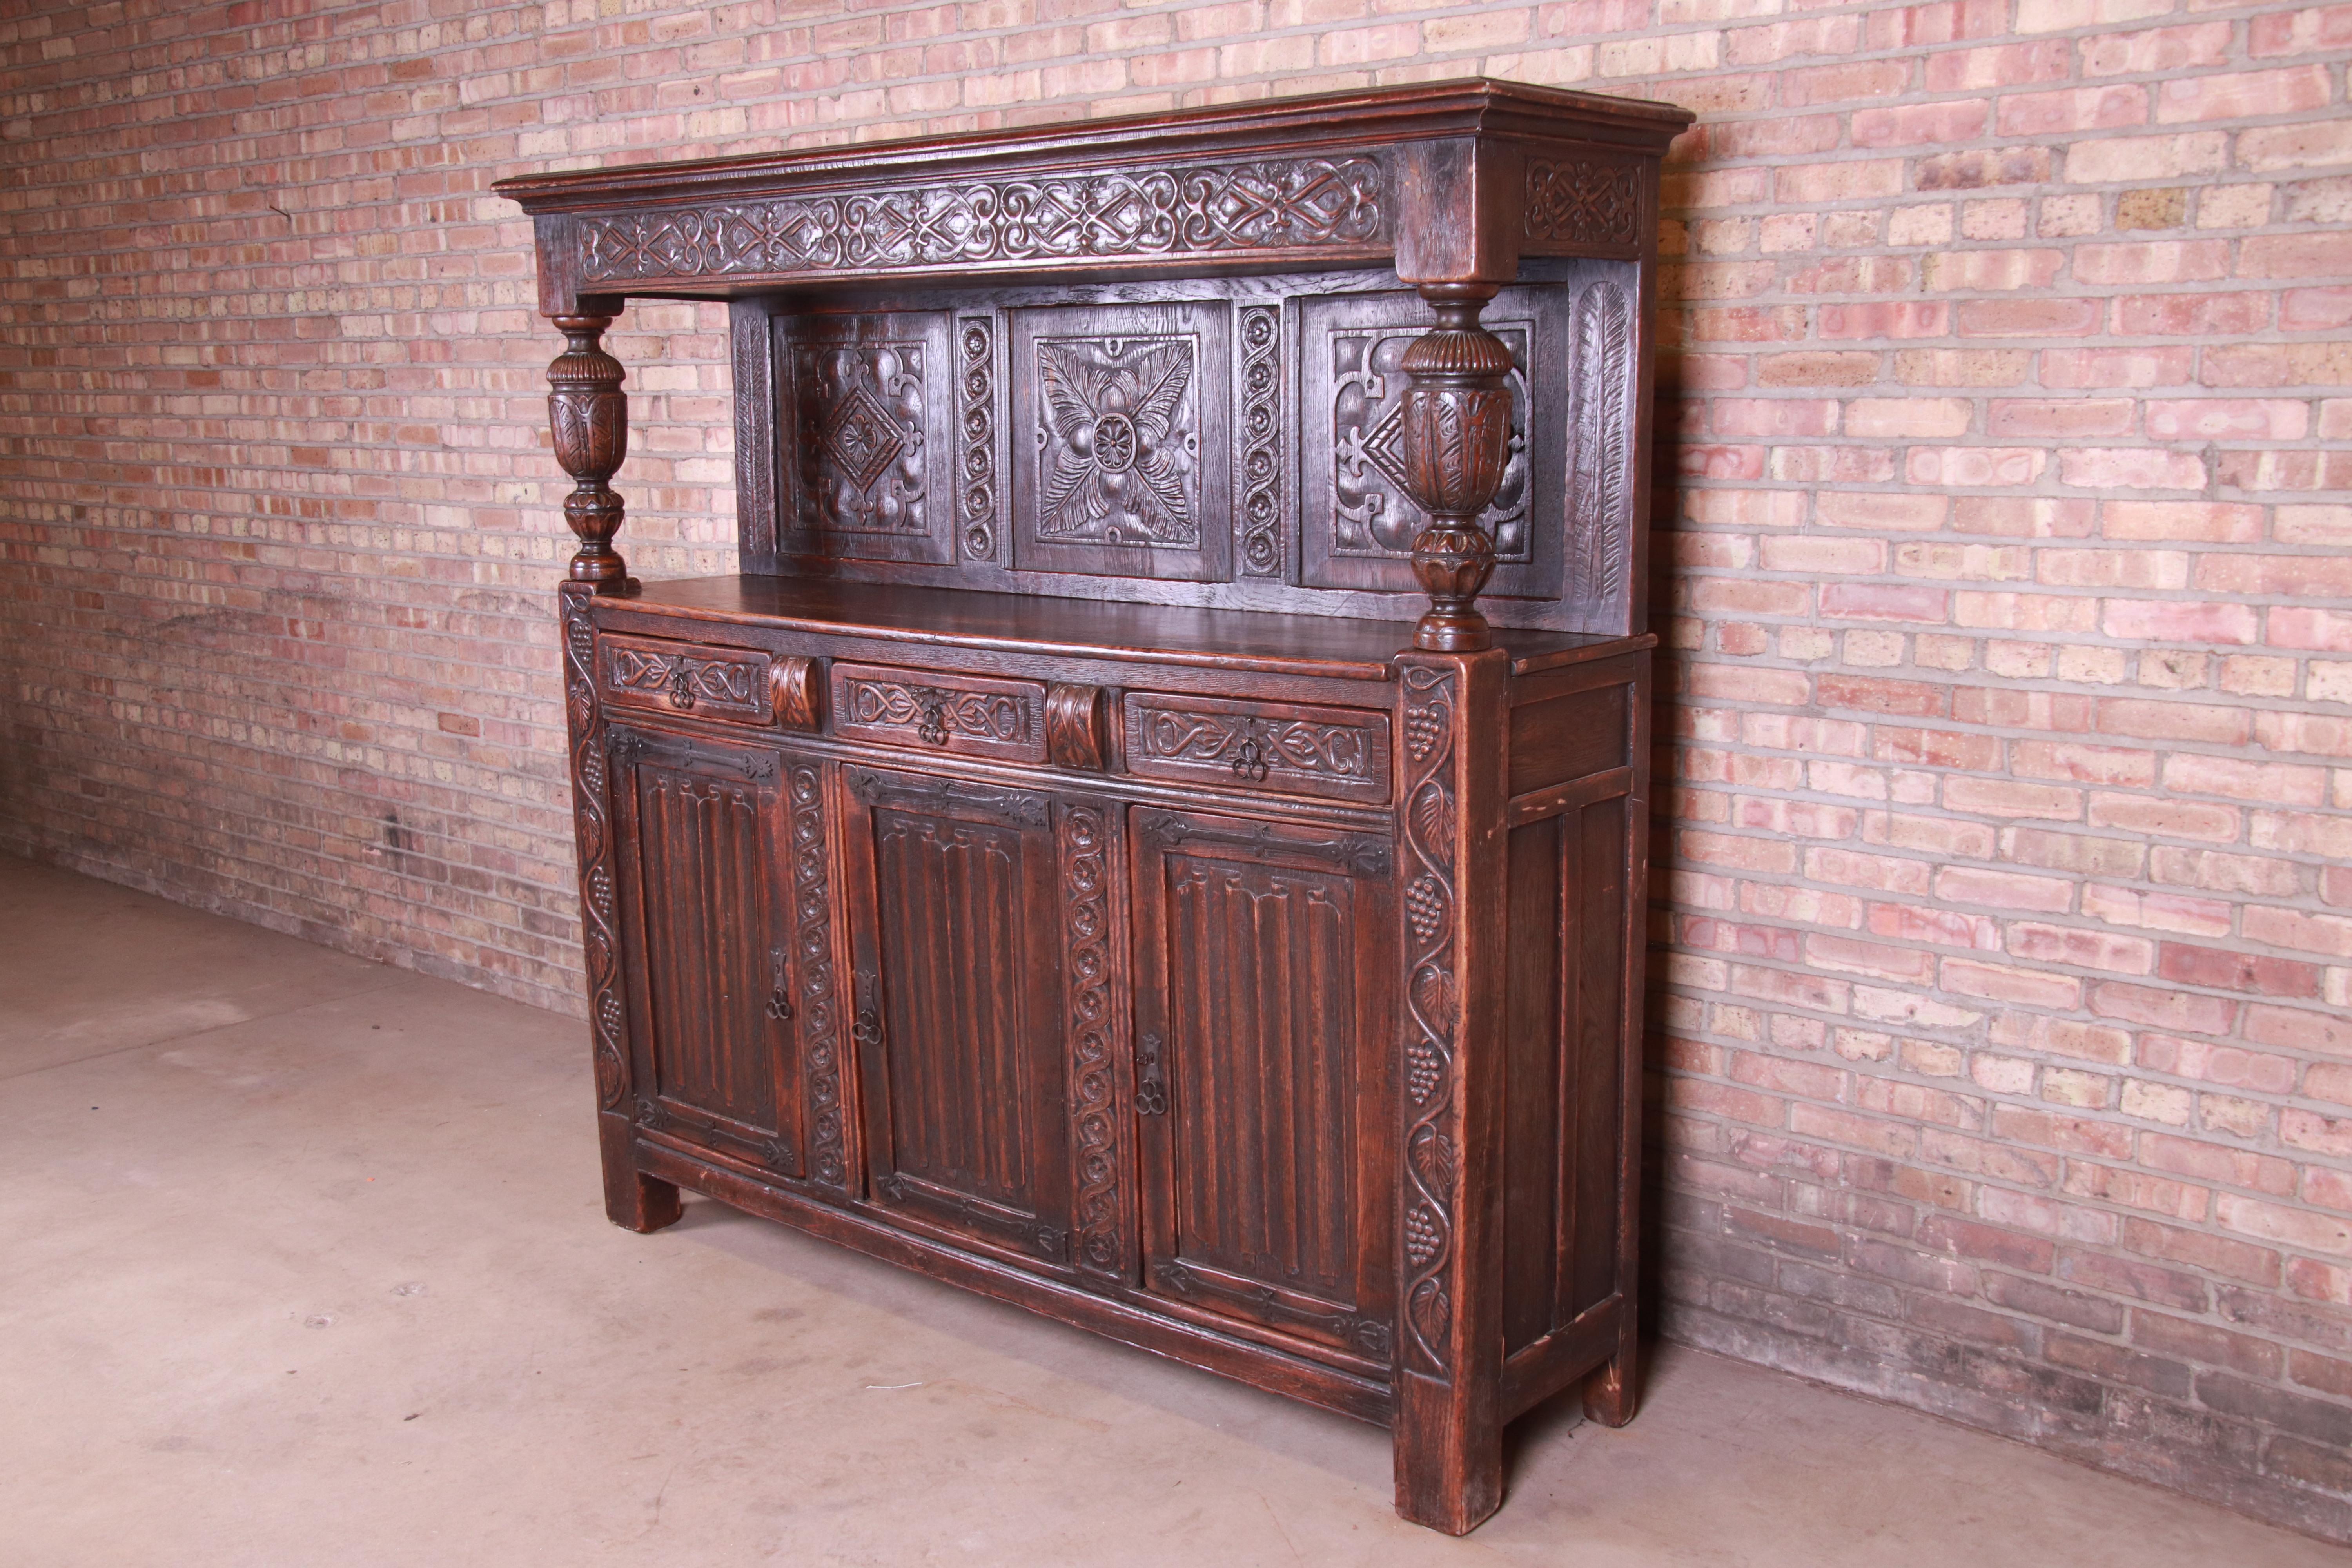 An exceptional antique Italian ornate carved oak sideboard or bar cabinet

Italy, circa 1800

Carved oak, with original wrought iron hardware

Measures: 78